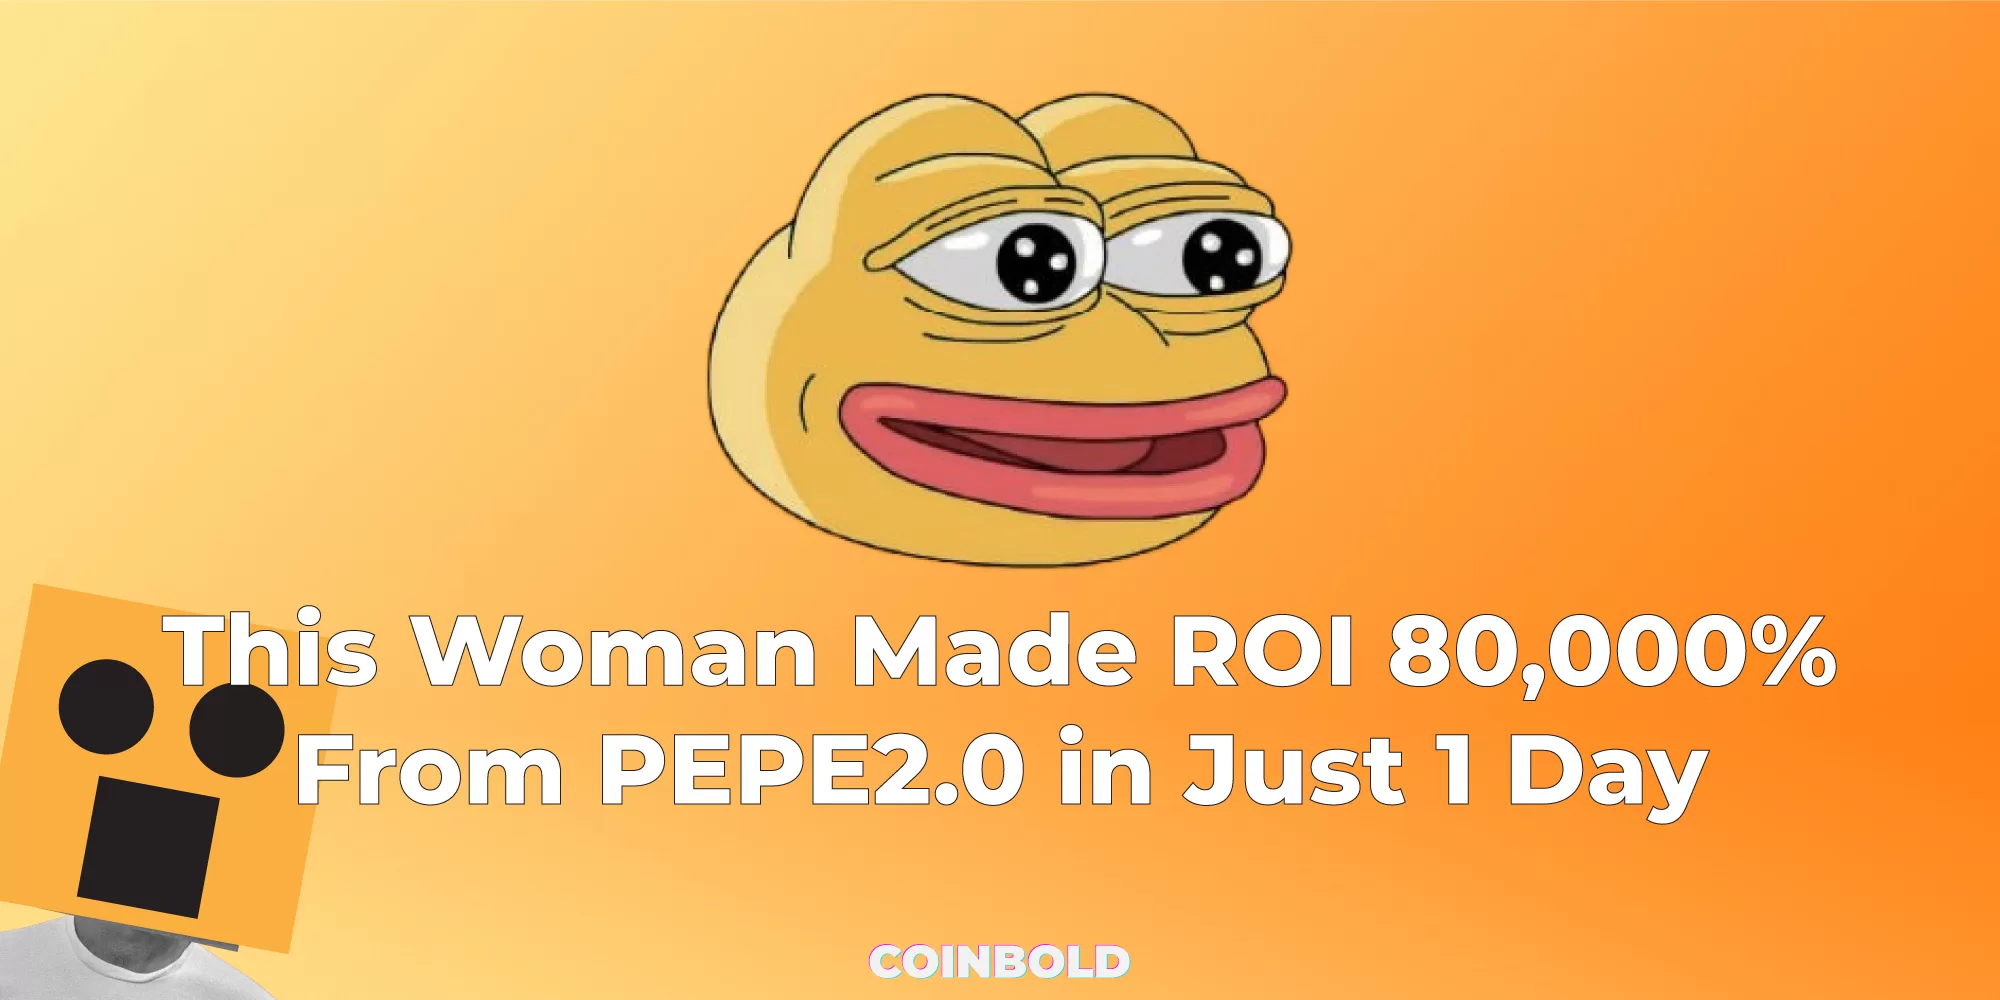 This Woman Made ROI 80,000% From PEPE2.0 in Just 1 Day